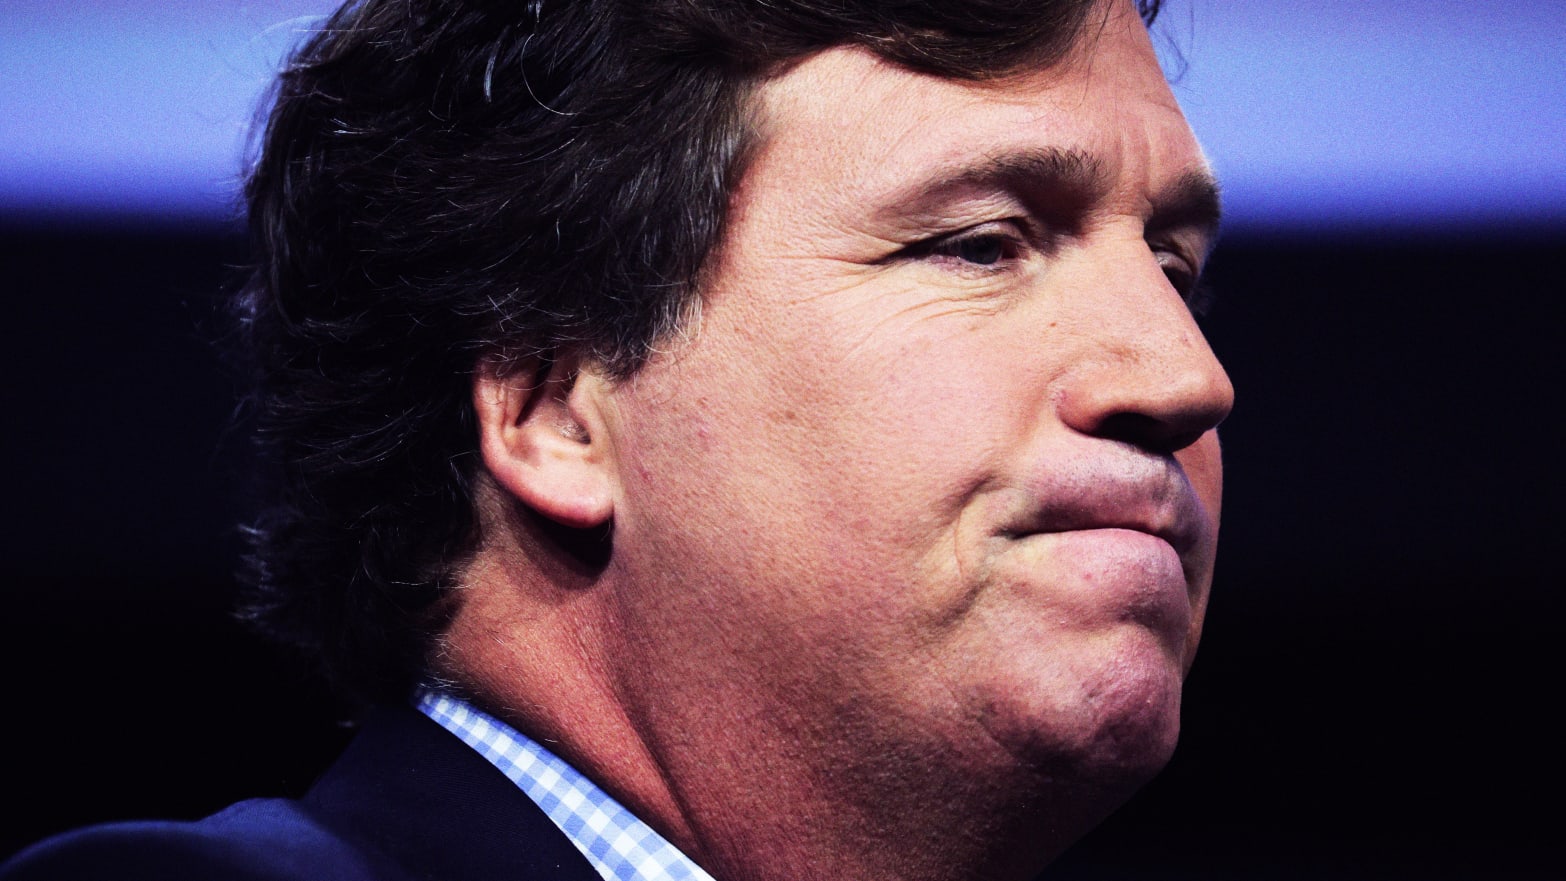  A close up photograph of Tucker Carlson grimacing.